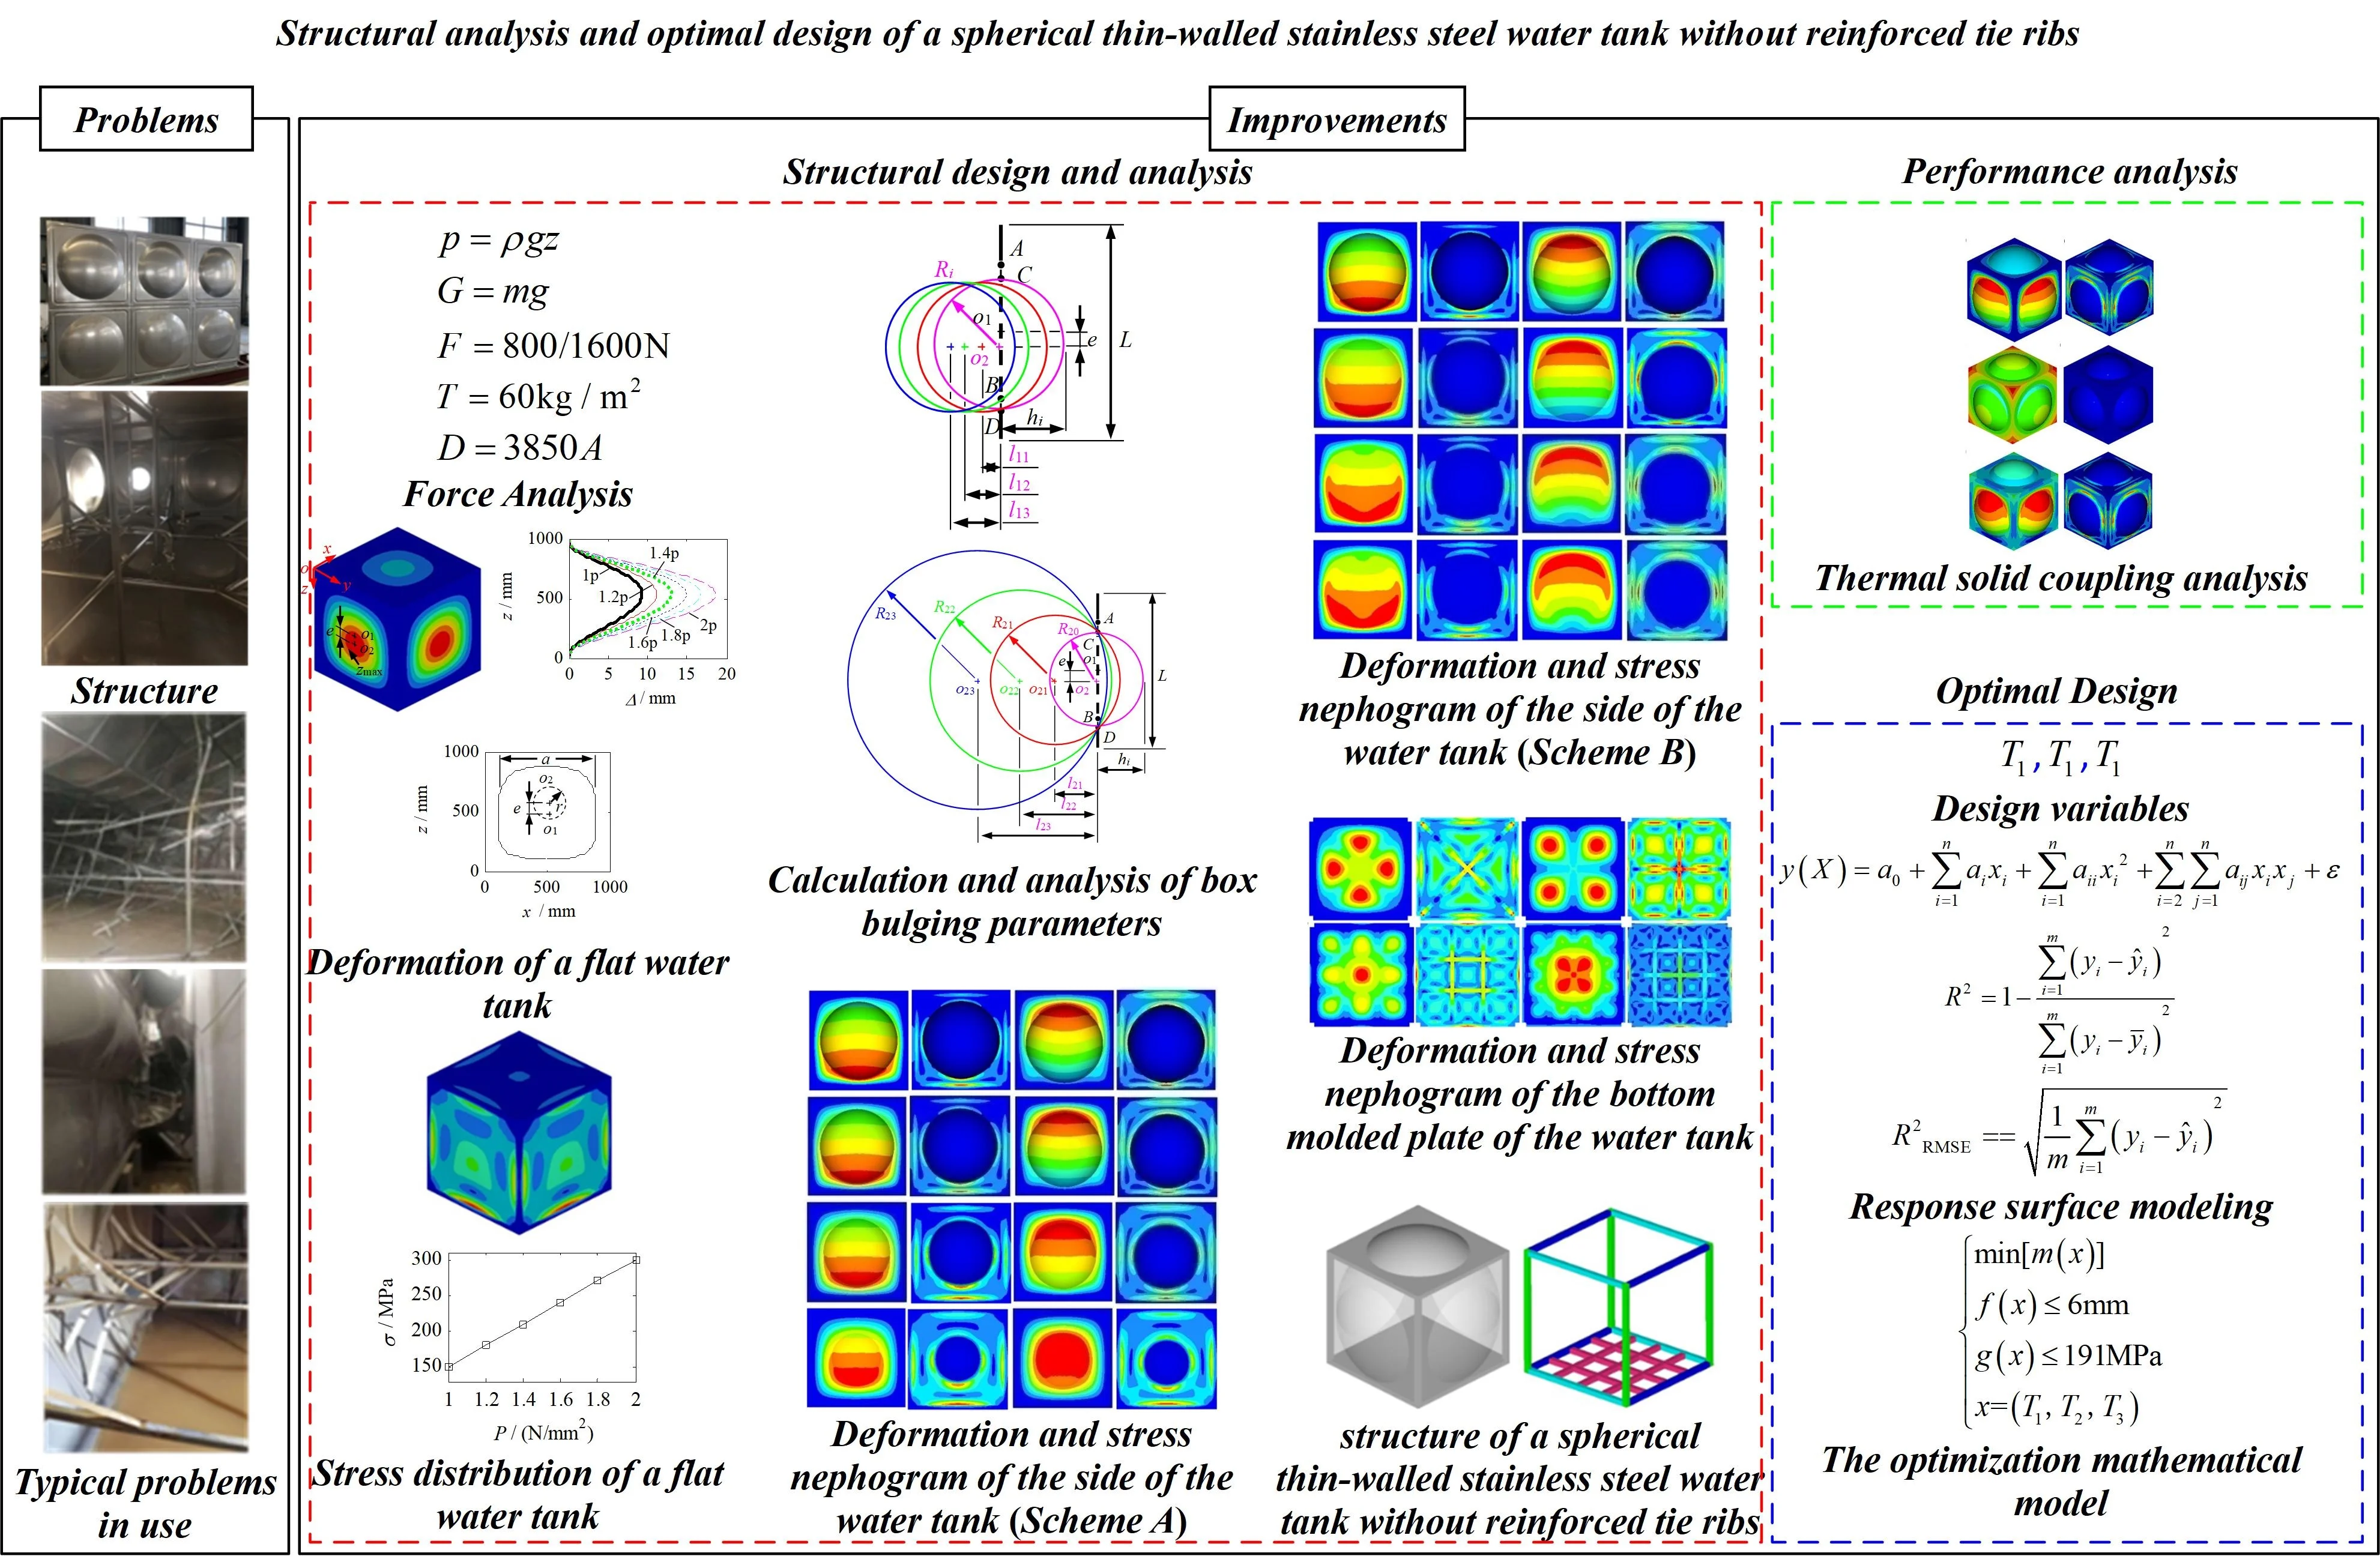 Structural analysis and optimal design of a spherical thin-walled stainless steel water tank without reinforced tie ribs